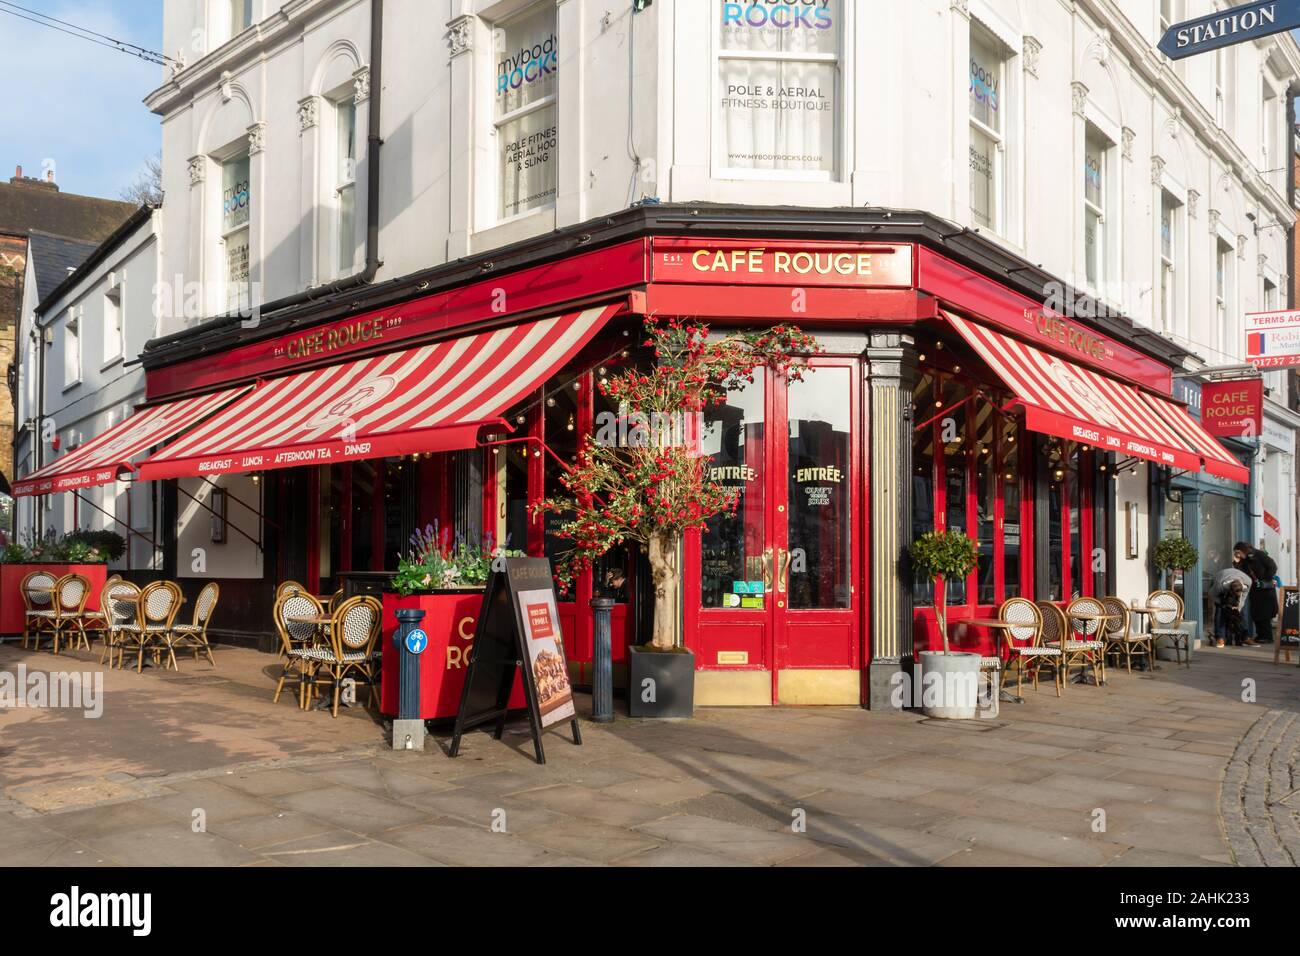 Café Rouge, French style chain restaurant on the High Street in Reigate town centre, Surrey, England, UK Stock Photo